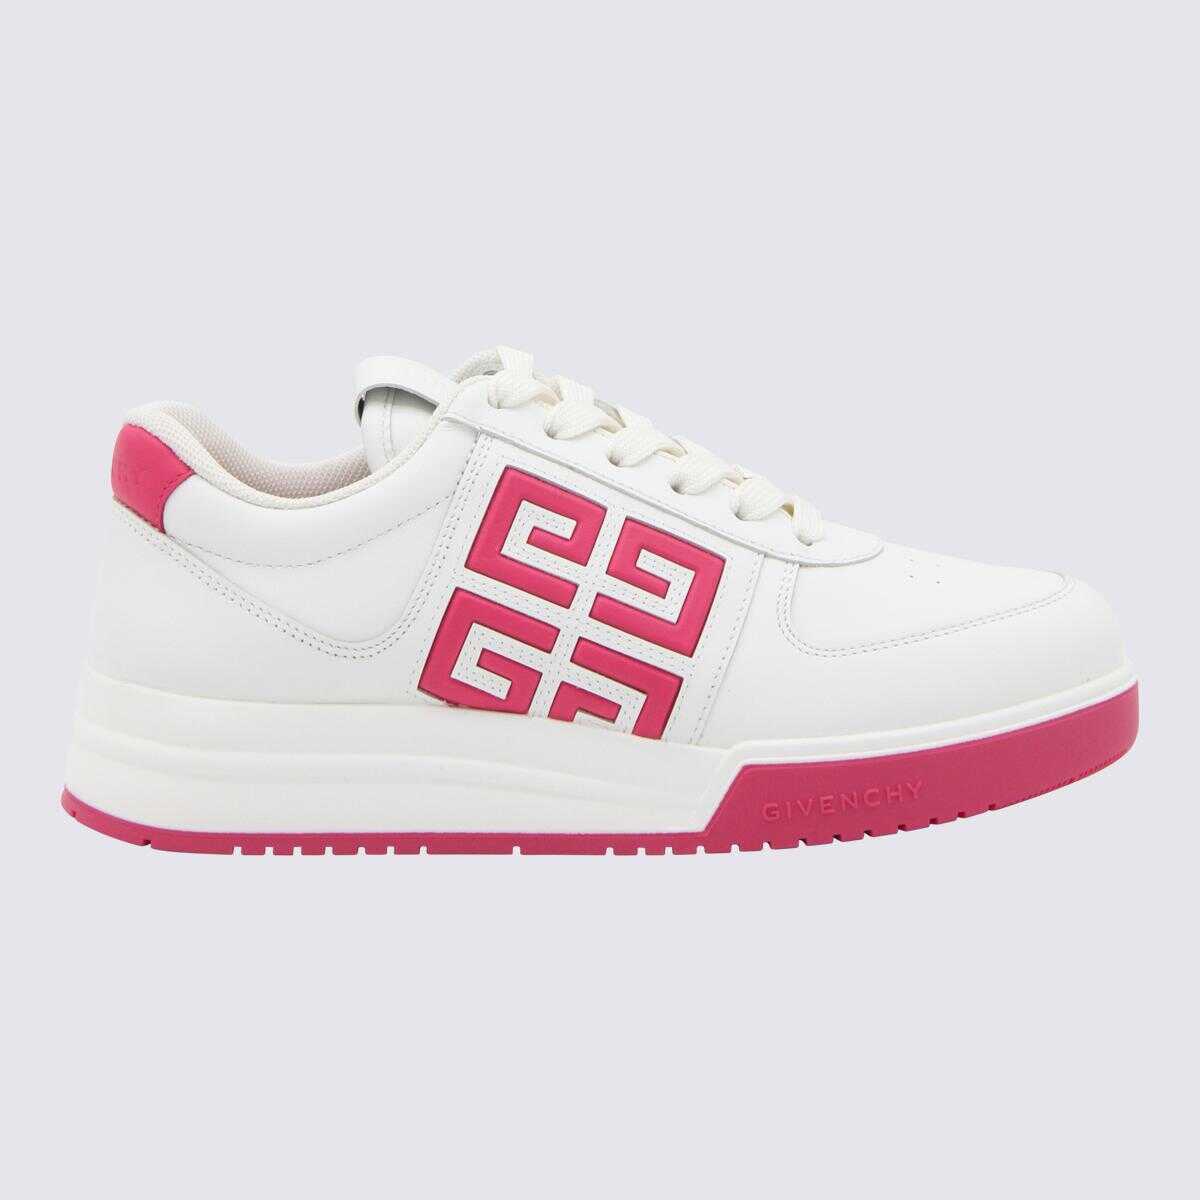 Givenchy GIVENCHY WHITE AND FUCHSIA LEATHER G4 LOW TOP SNEAKERS WHITE/FUCHSIA